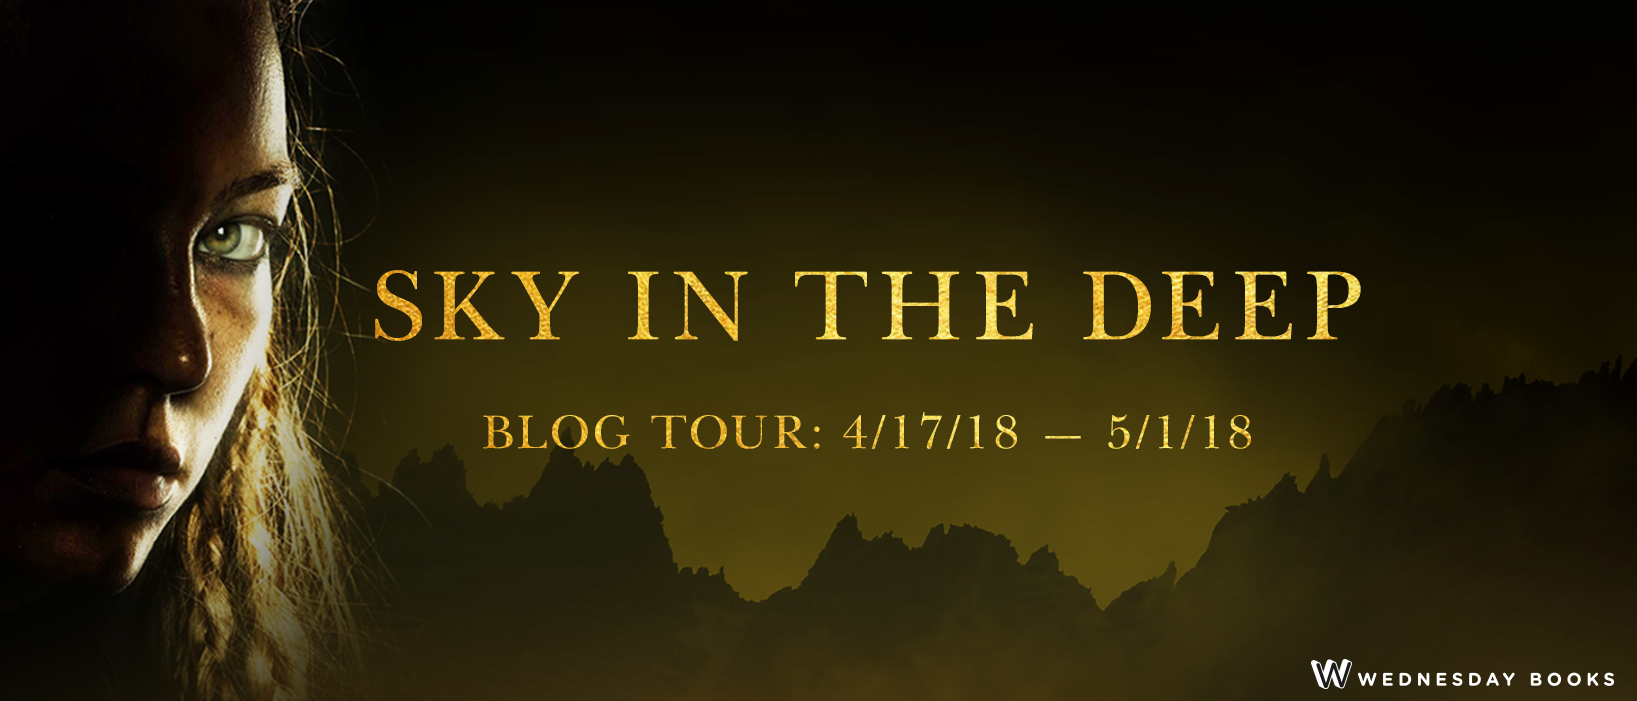 Blog Tour: Sky In The Deep by Adrienne Young